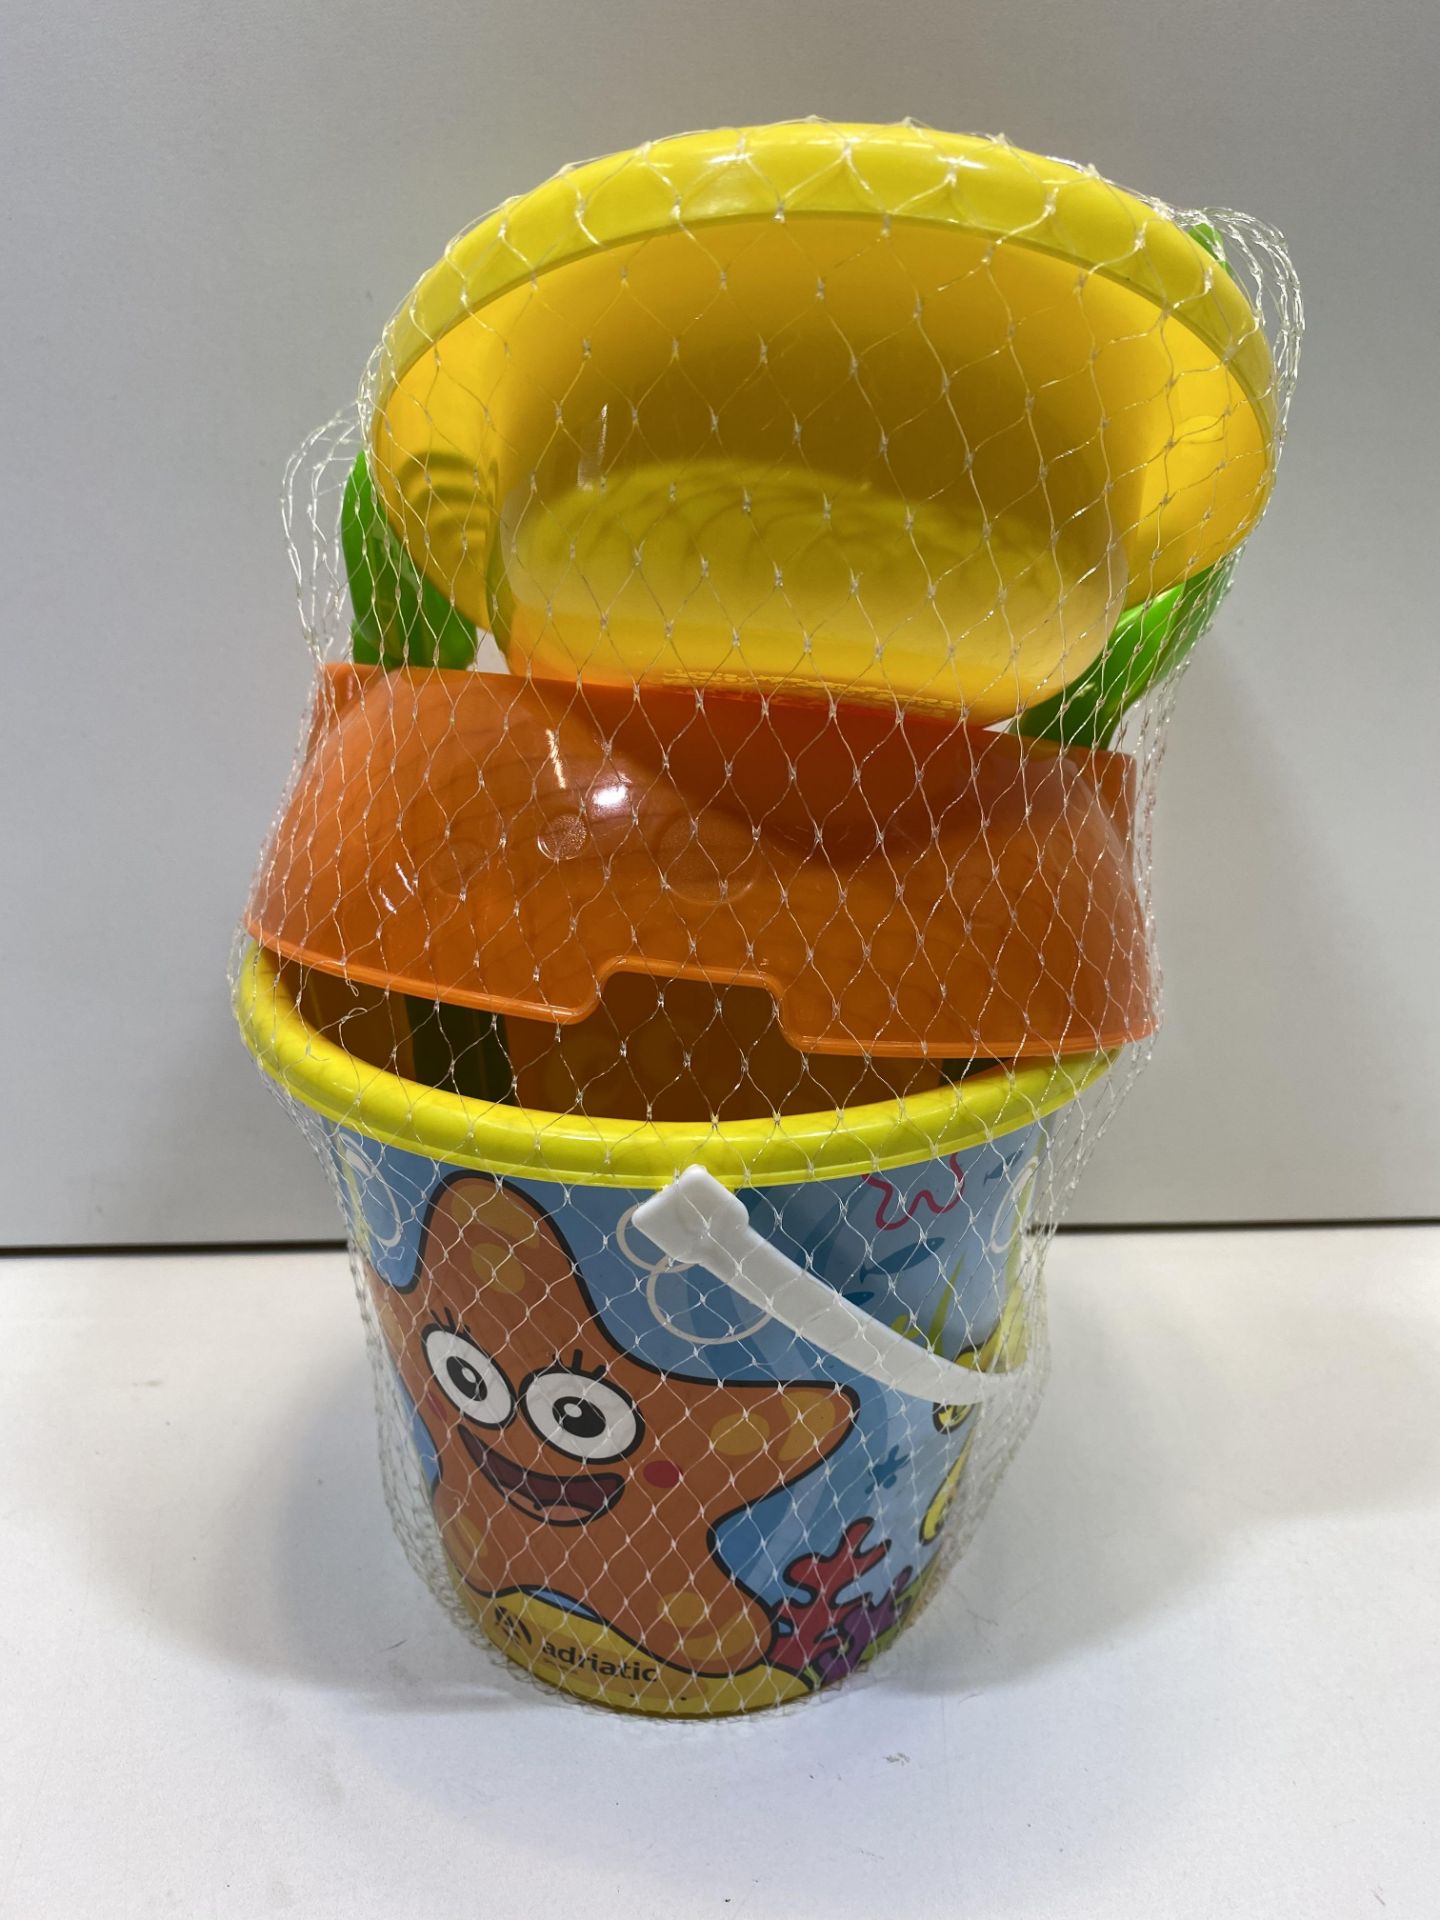 25 x Adriatic bucket and spade sets with boat and tools. |8002936826008